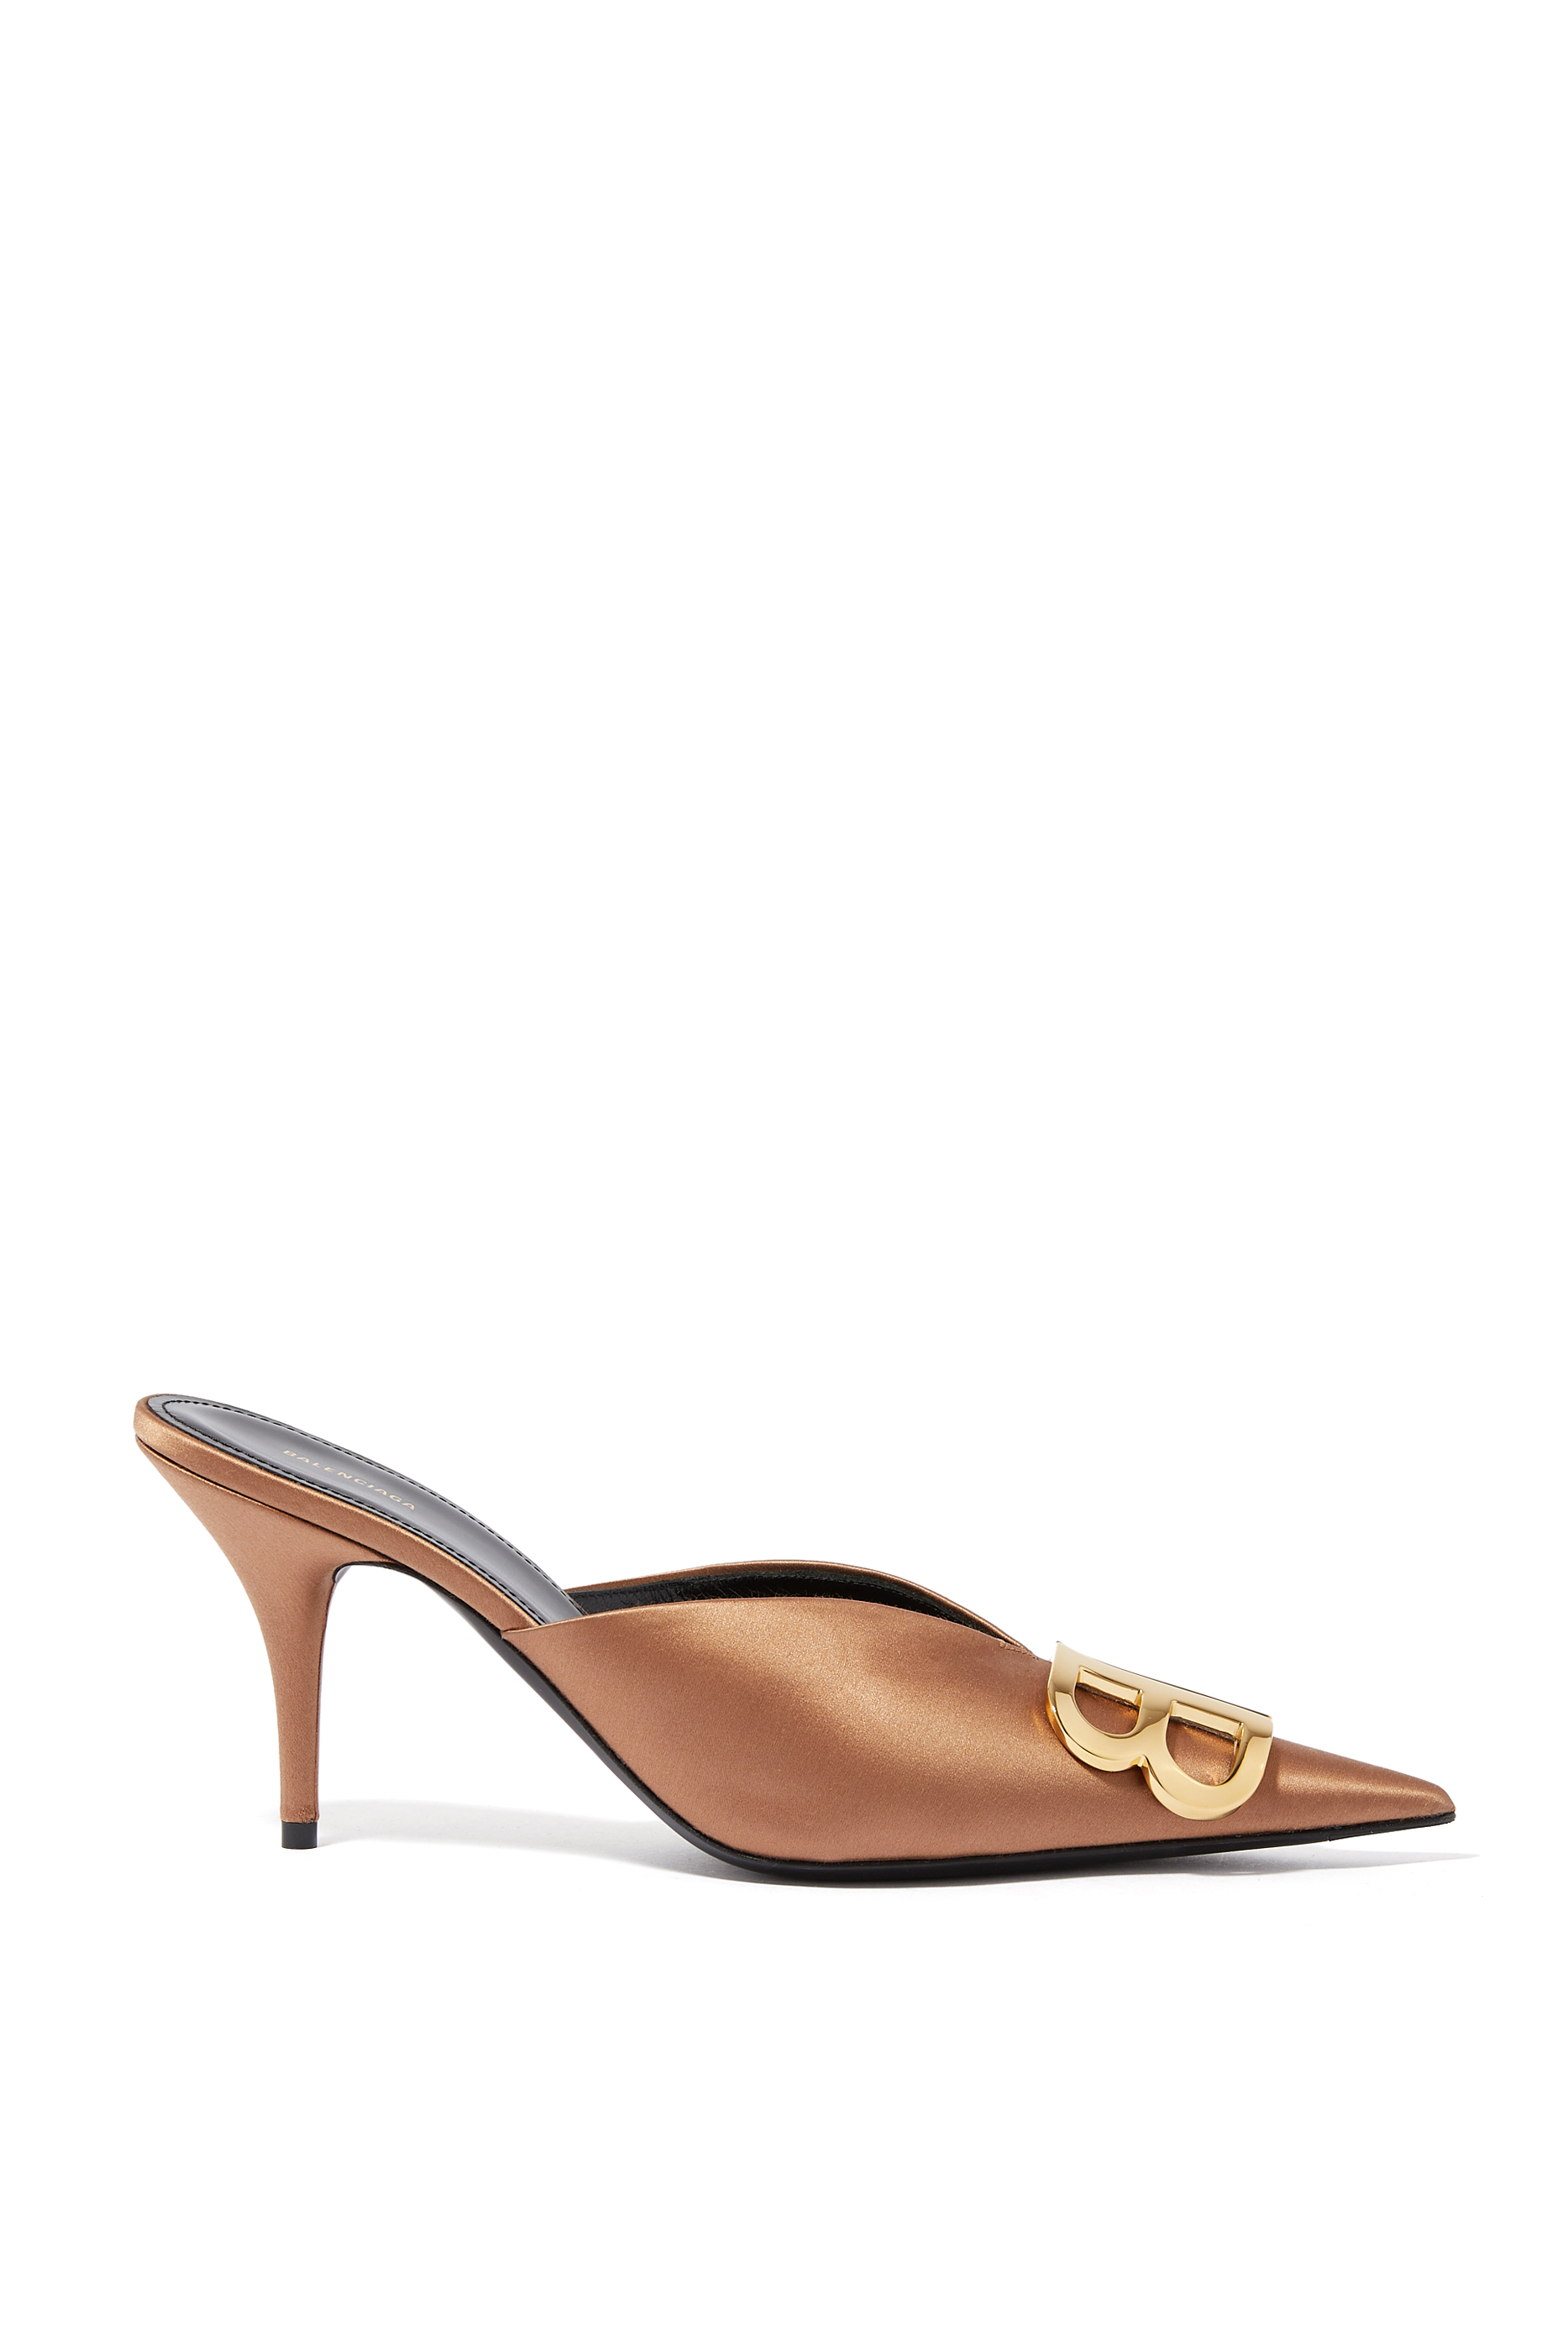 Buy Balenciaga BB Satin Mules - Womens for AED 3250.00 Heels for Women | Bloomingdale's UAE